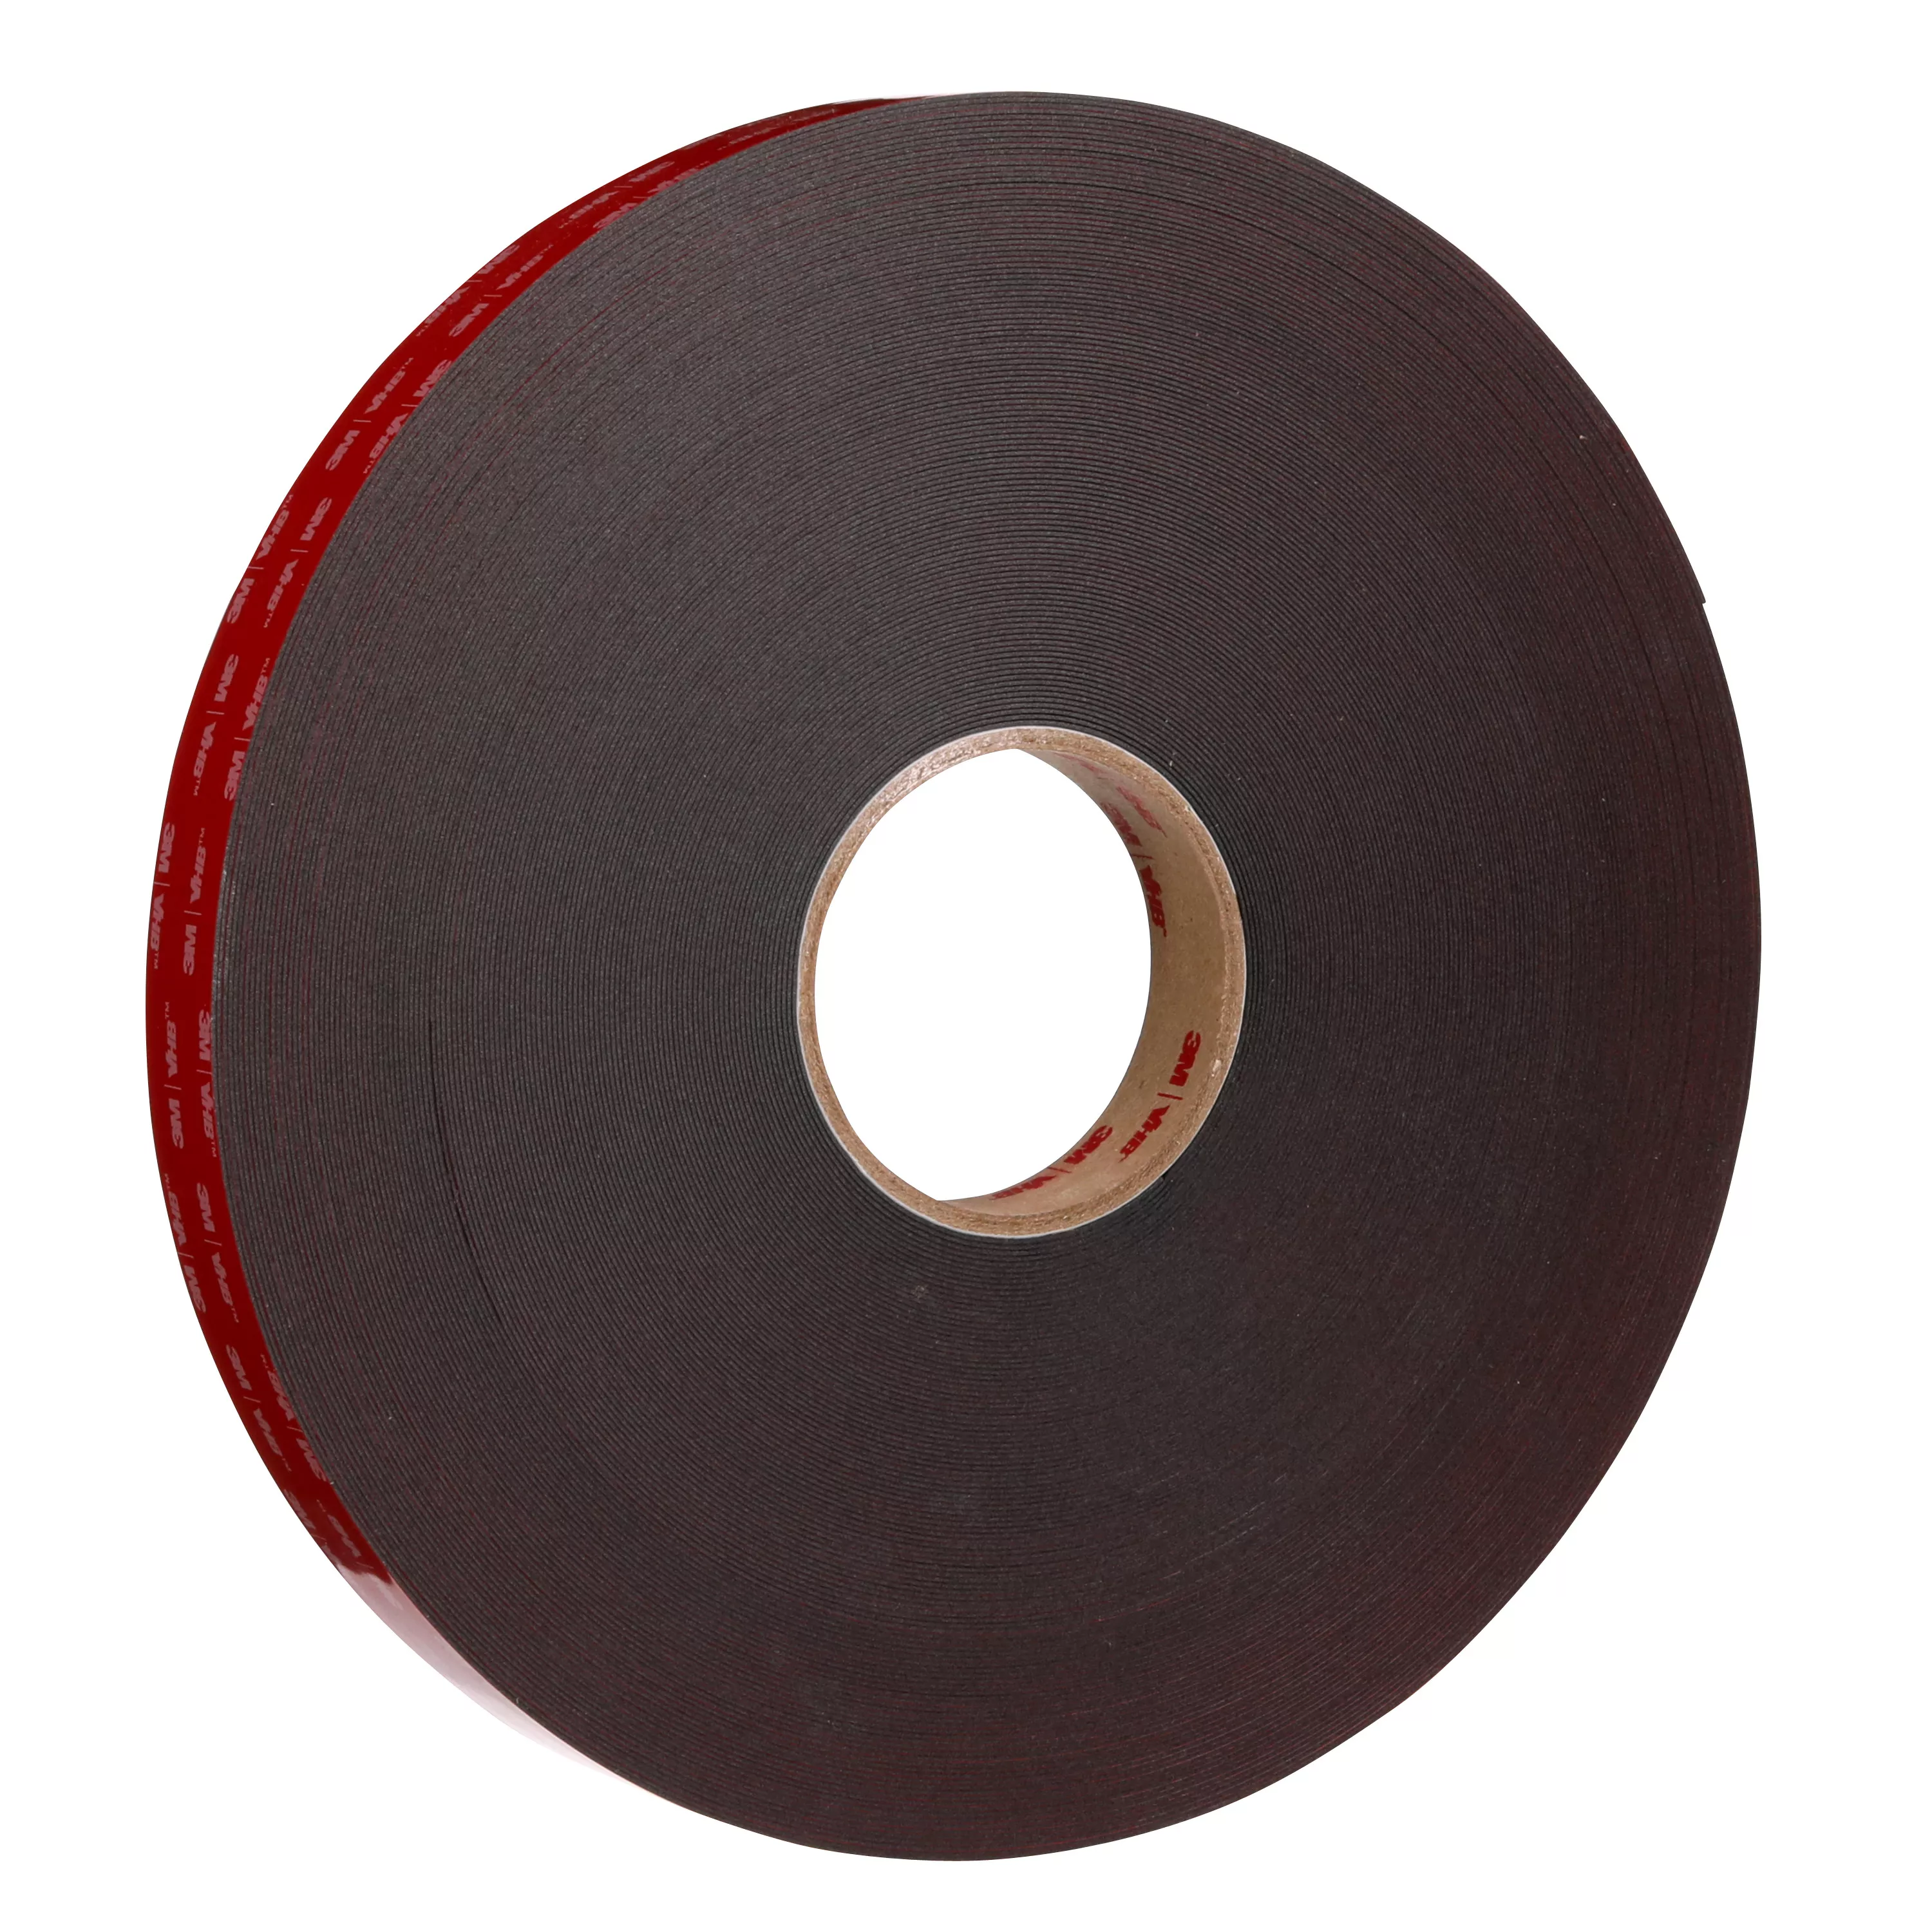 Product Number 4979 | 3M™ VHB™ Tape 4979F